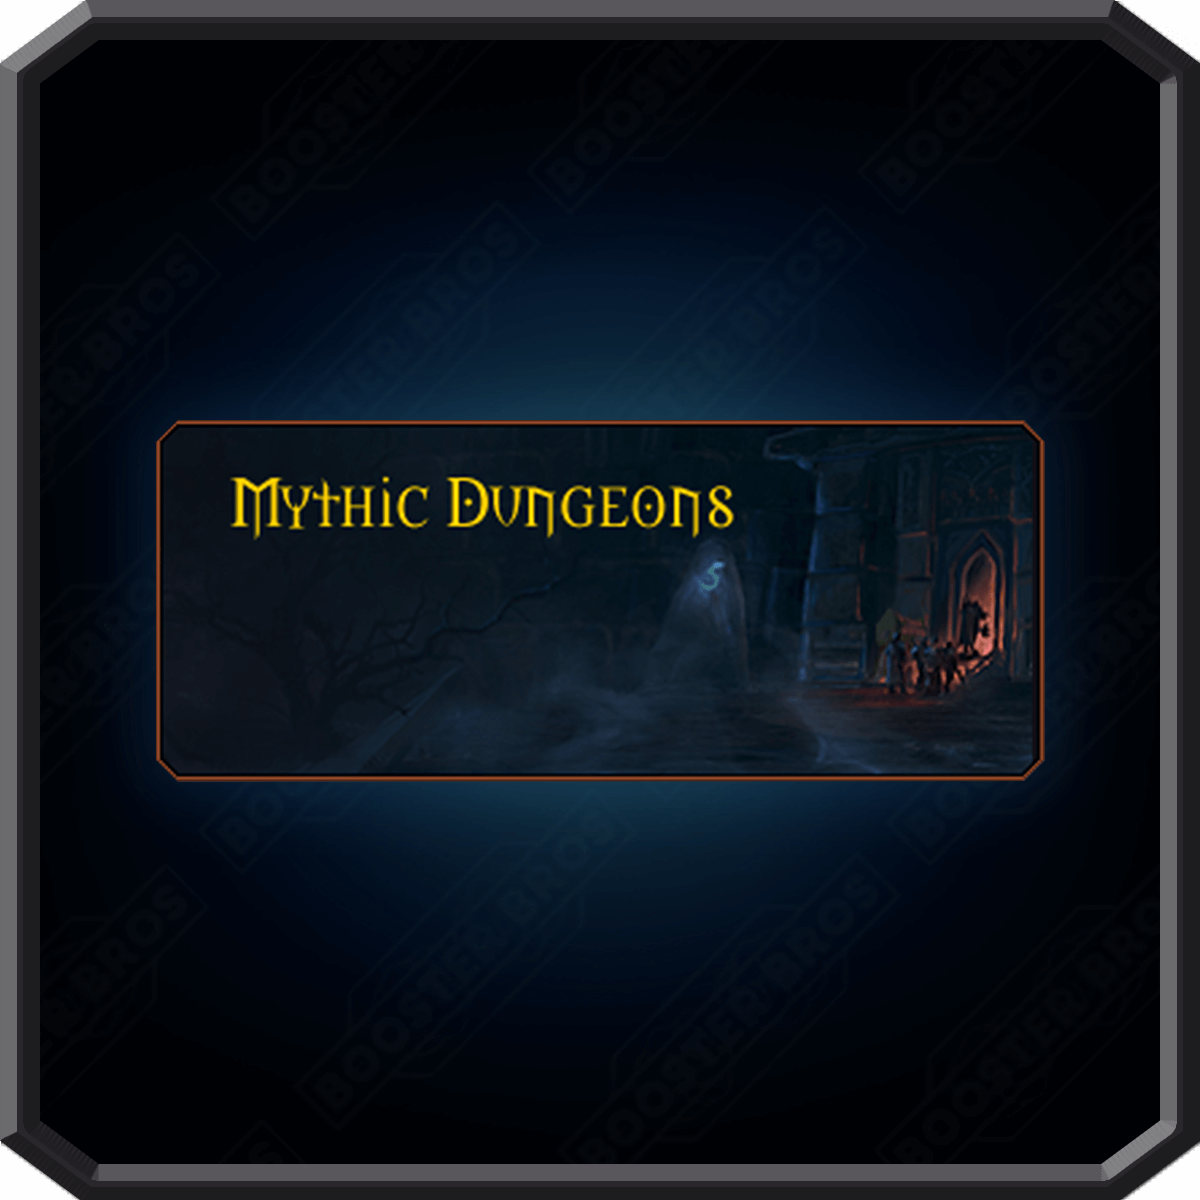 Mythic Dungeons Boost 8/8 Mythic Dungeons!